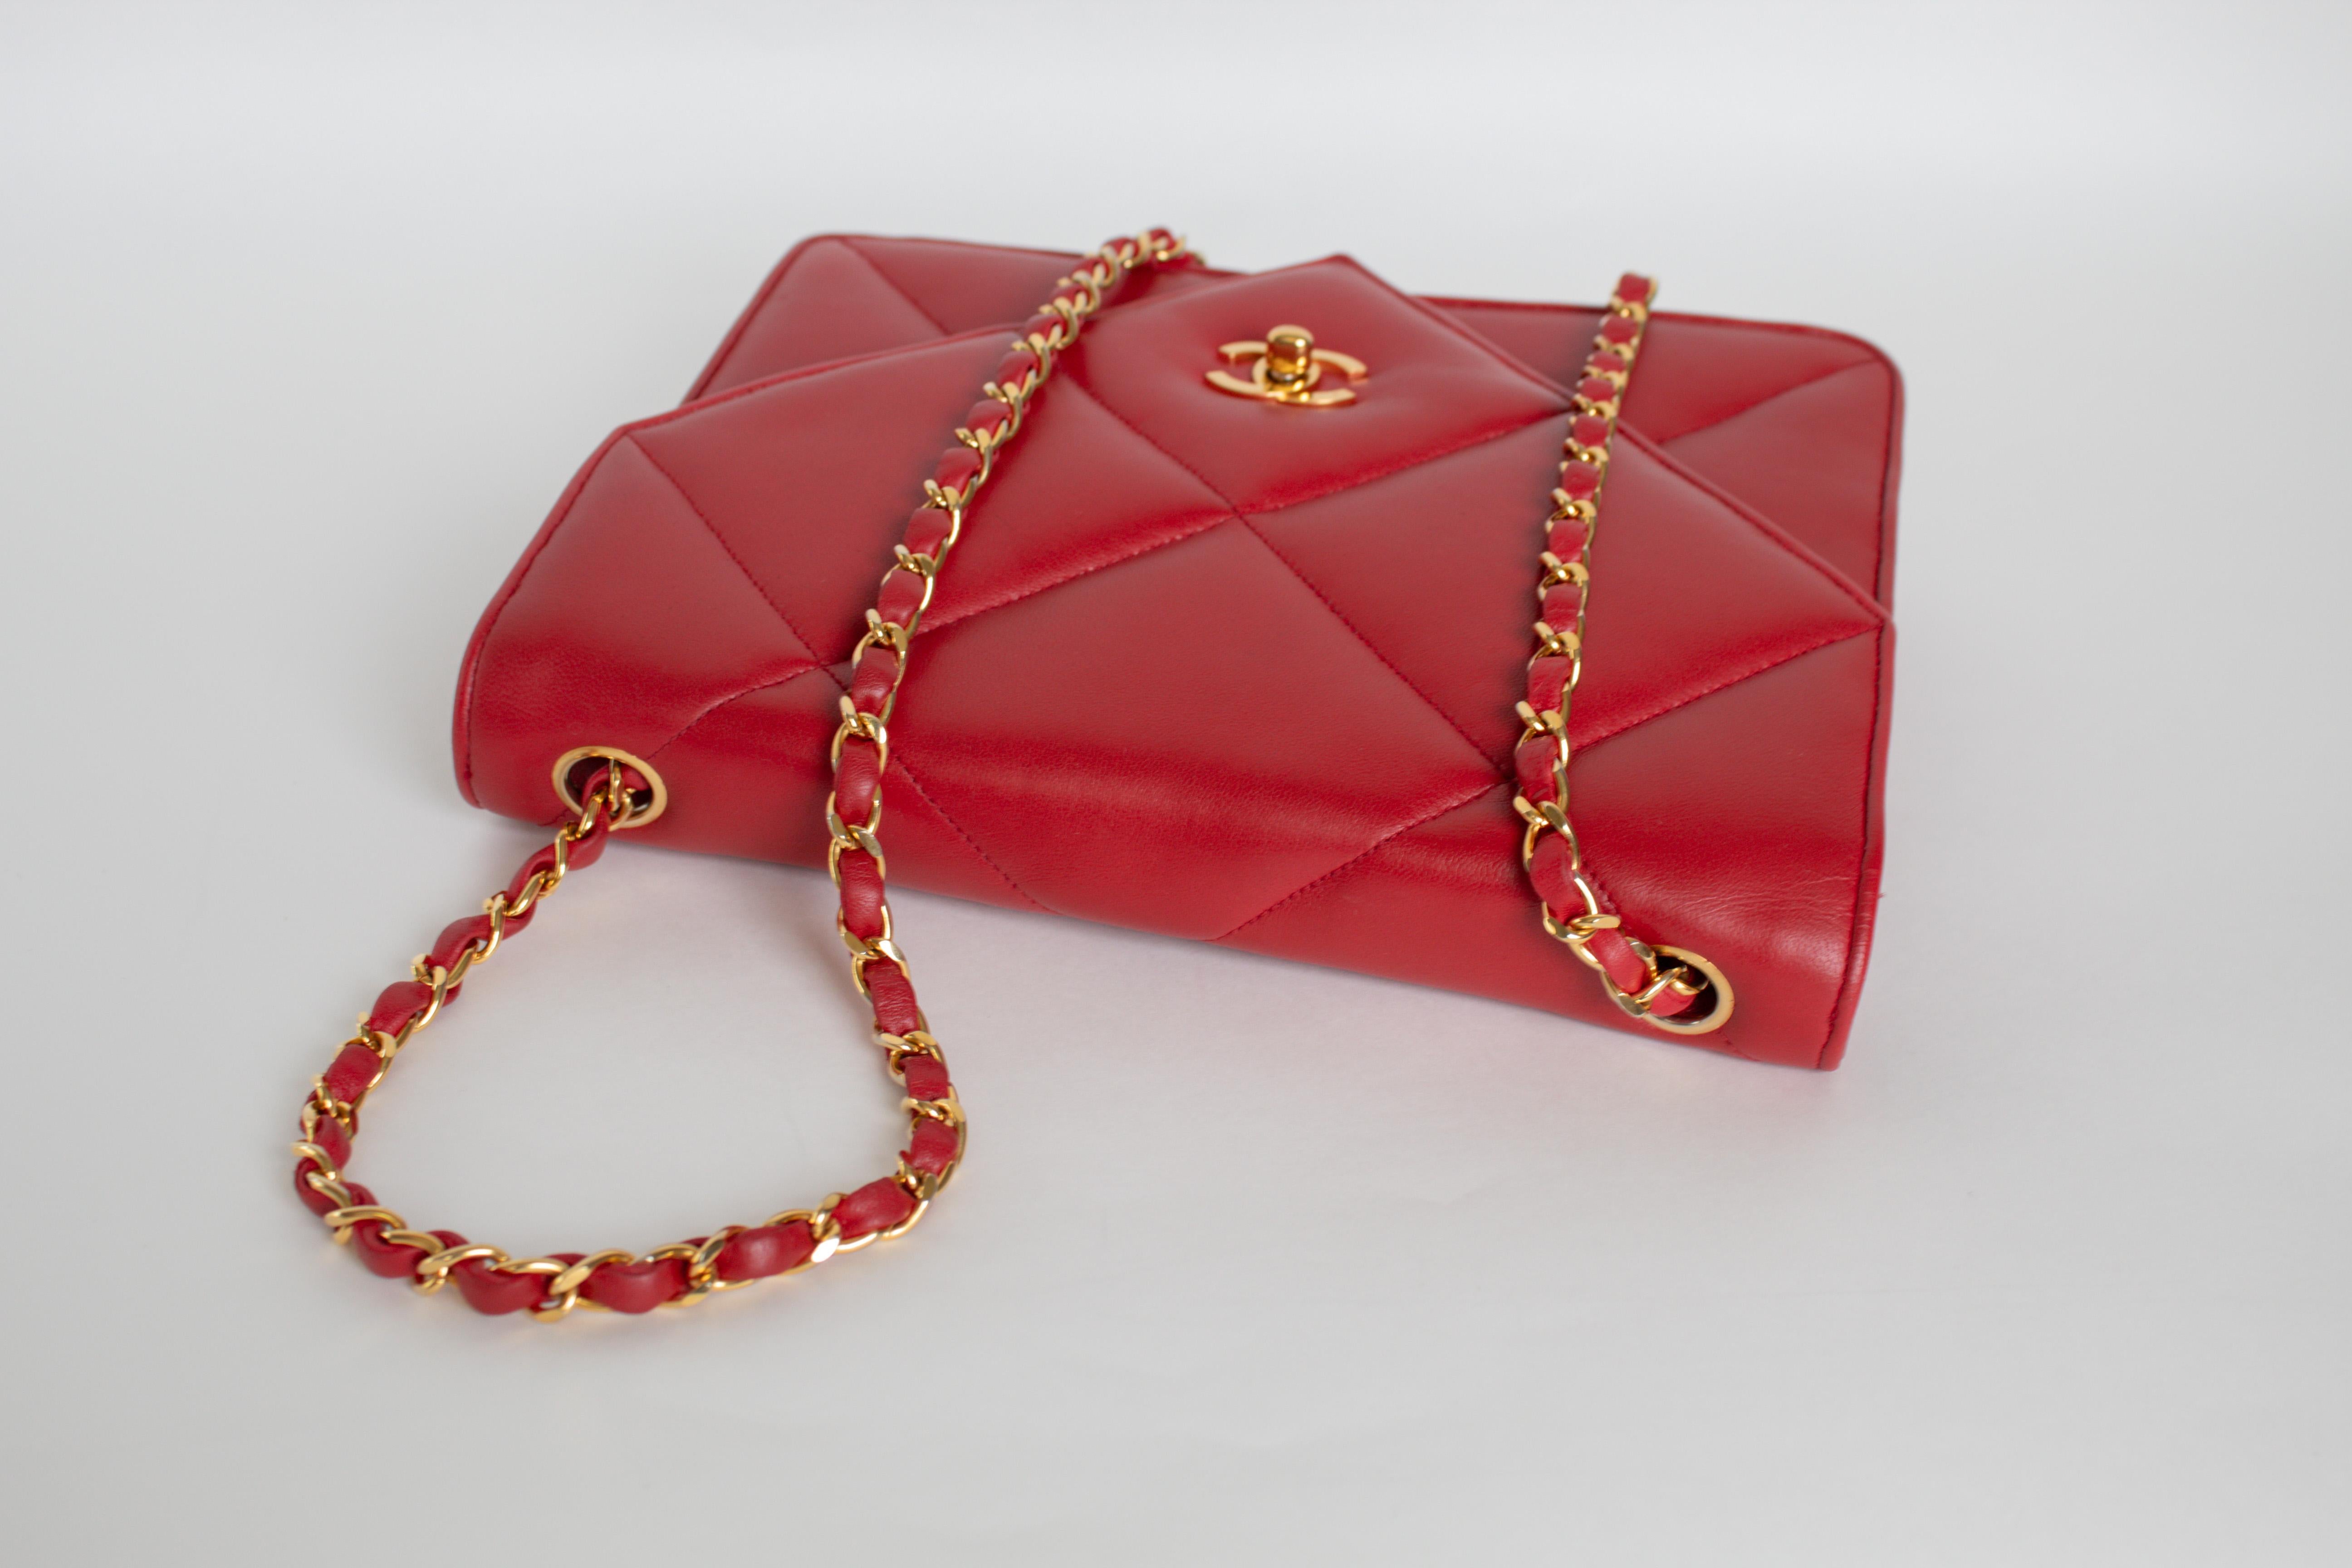 Classic Chanel 19 Vintage Rare 90s Jumbo Lambskin Red Envelope Flap Bag  For Sale 4